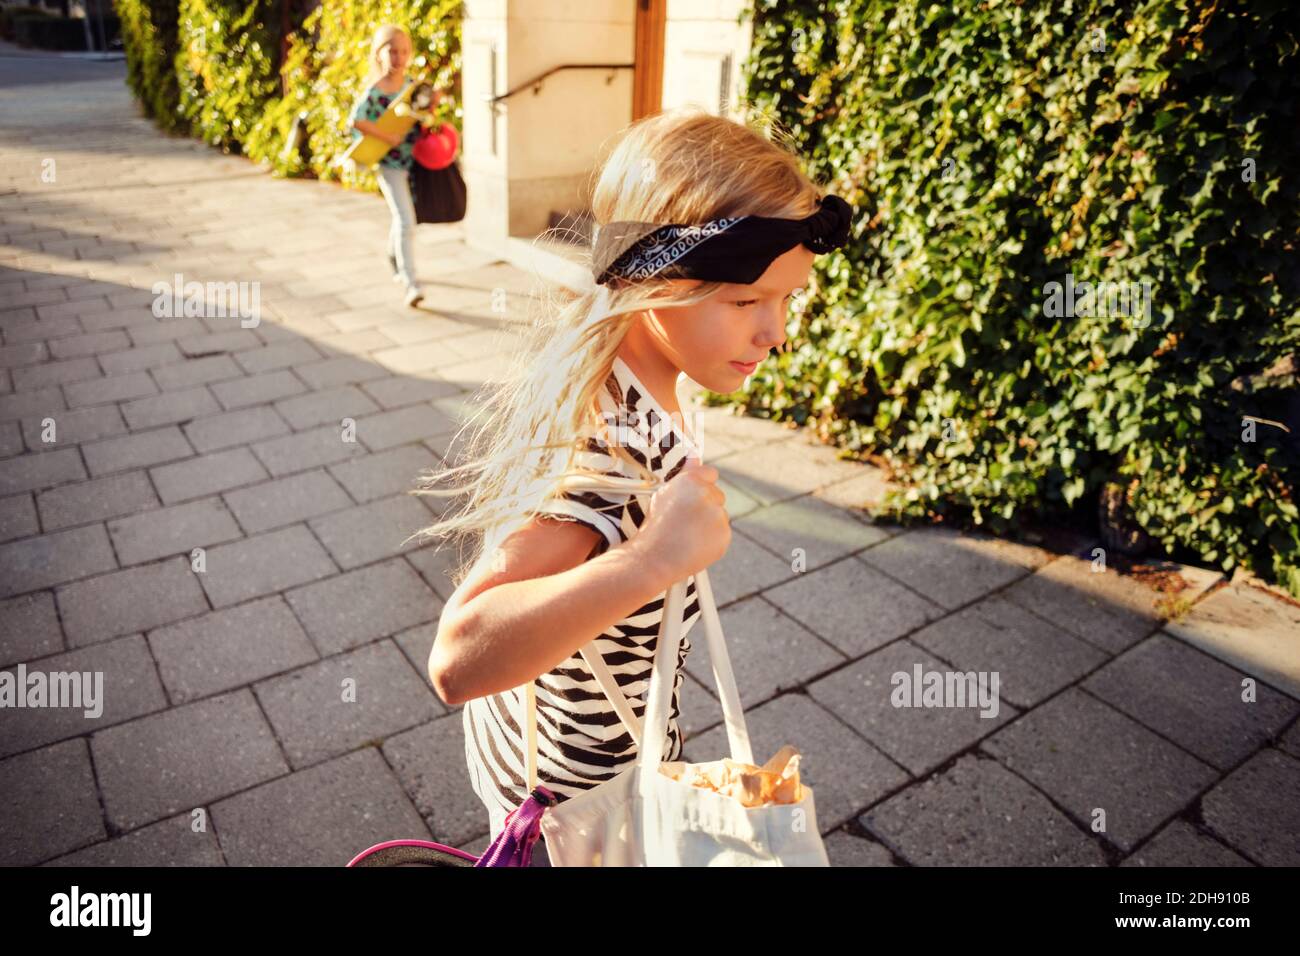 Girl carrying while walking on sidewalk during sunny day Stock Photo